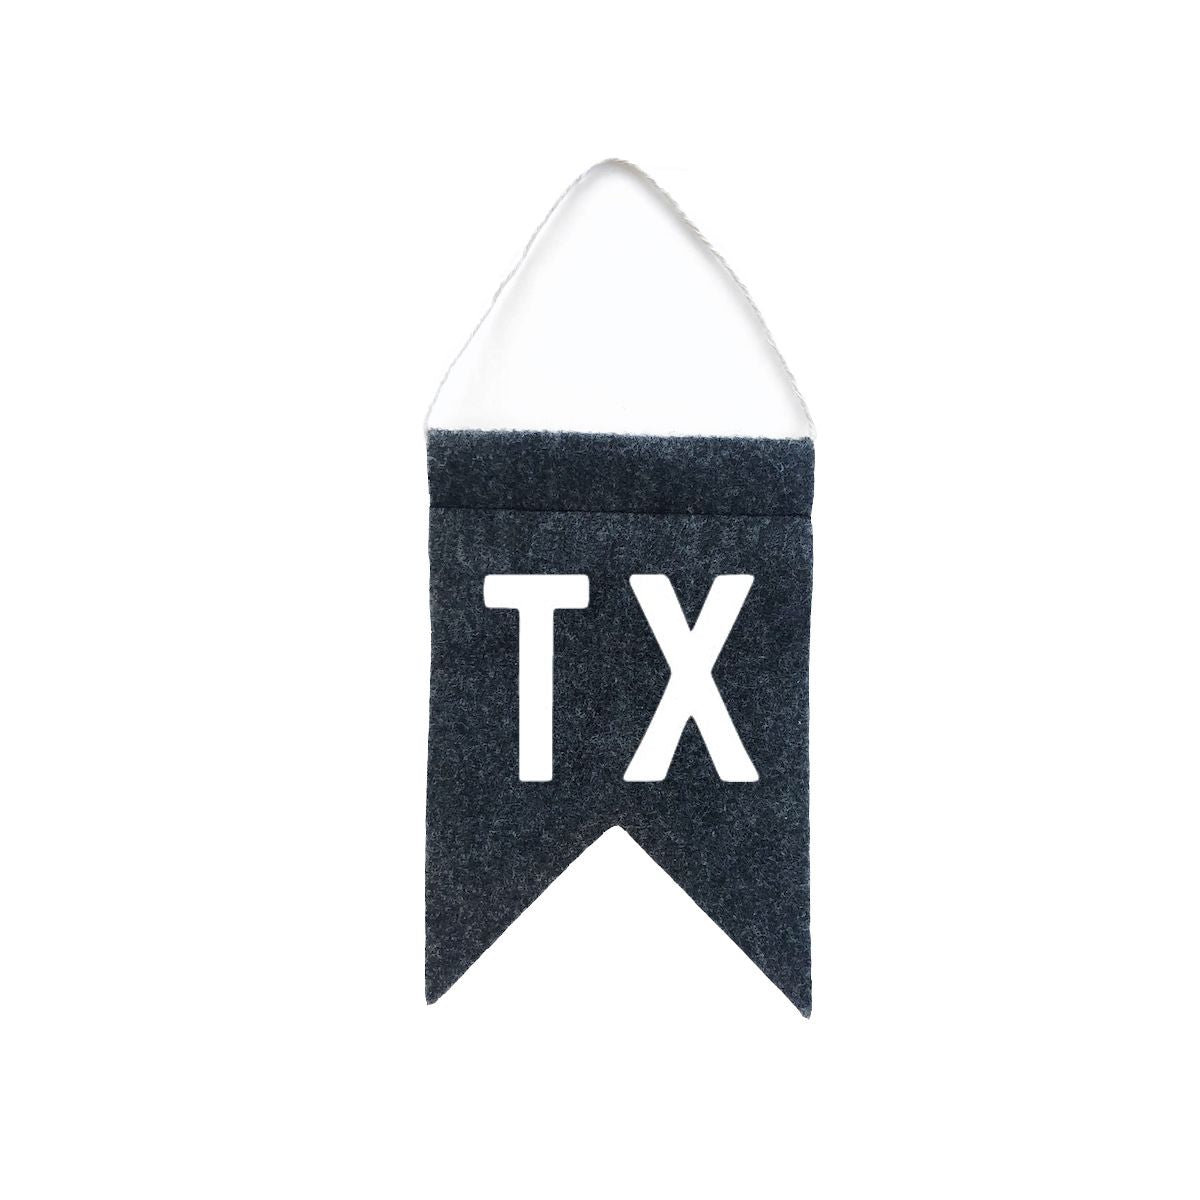 TX Small Hanging Pennant